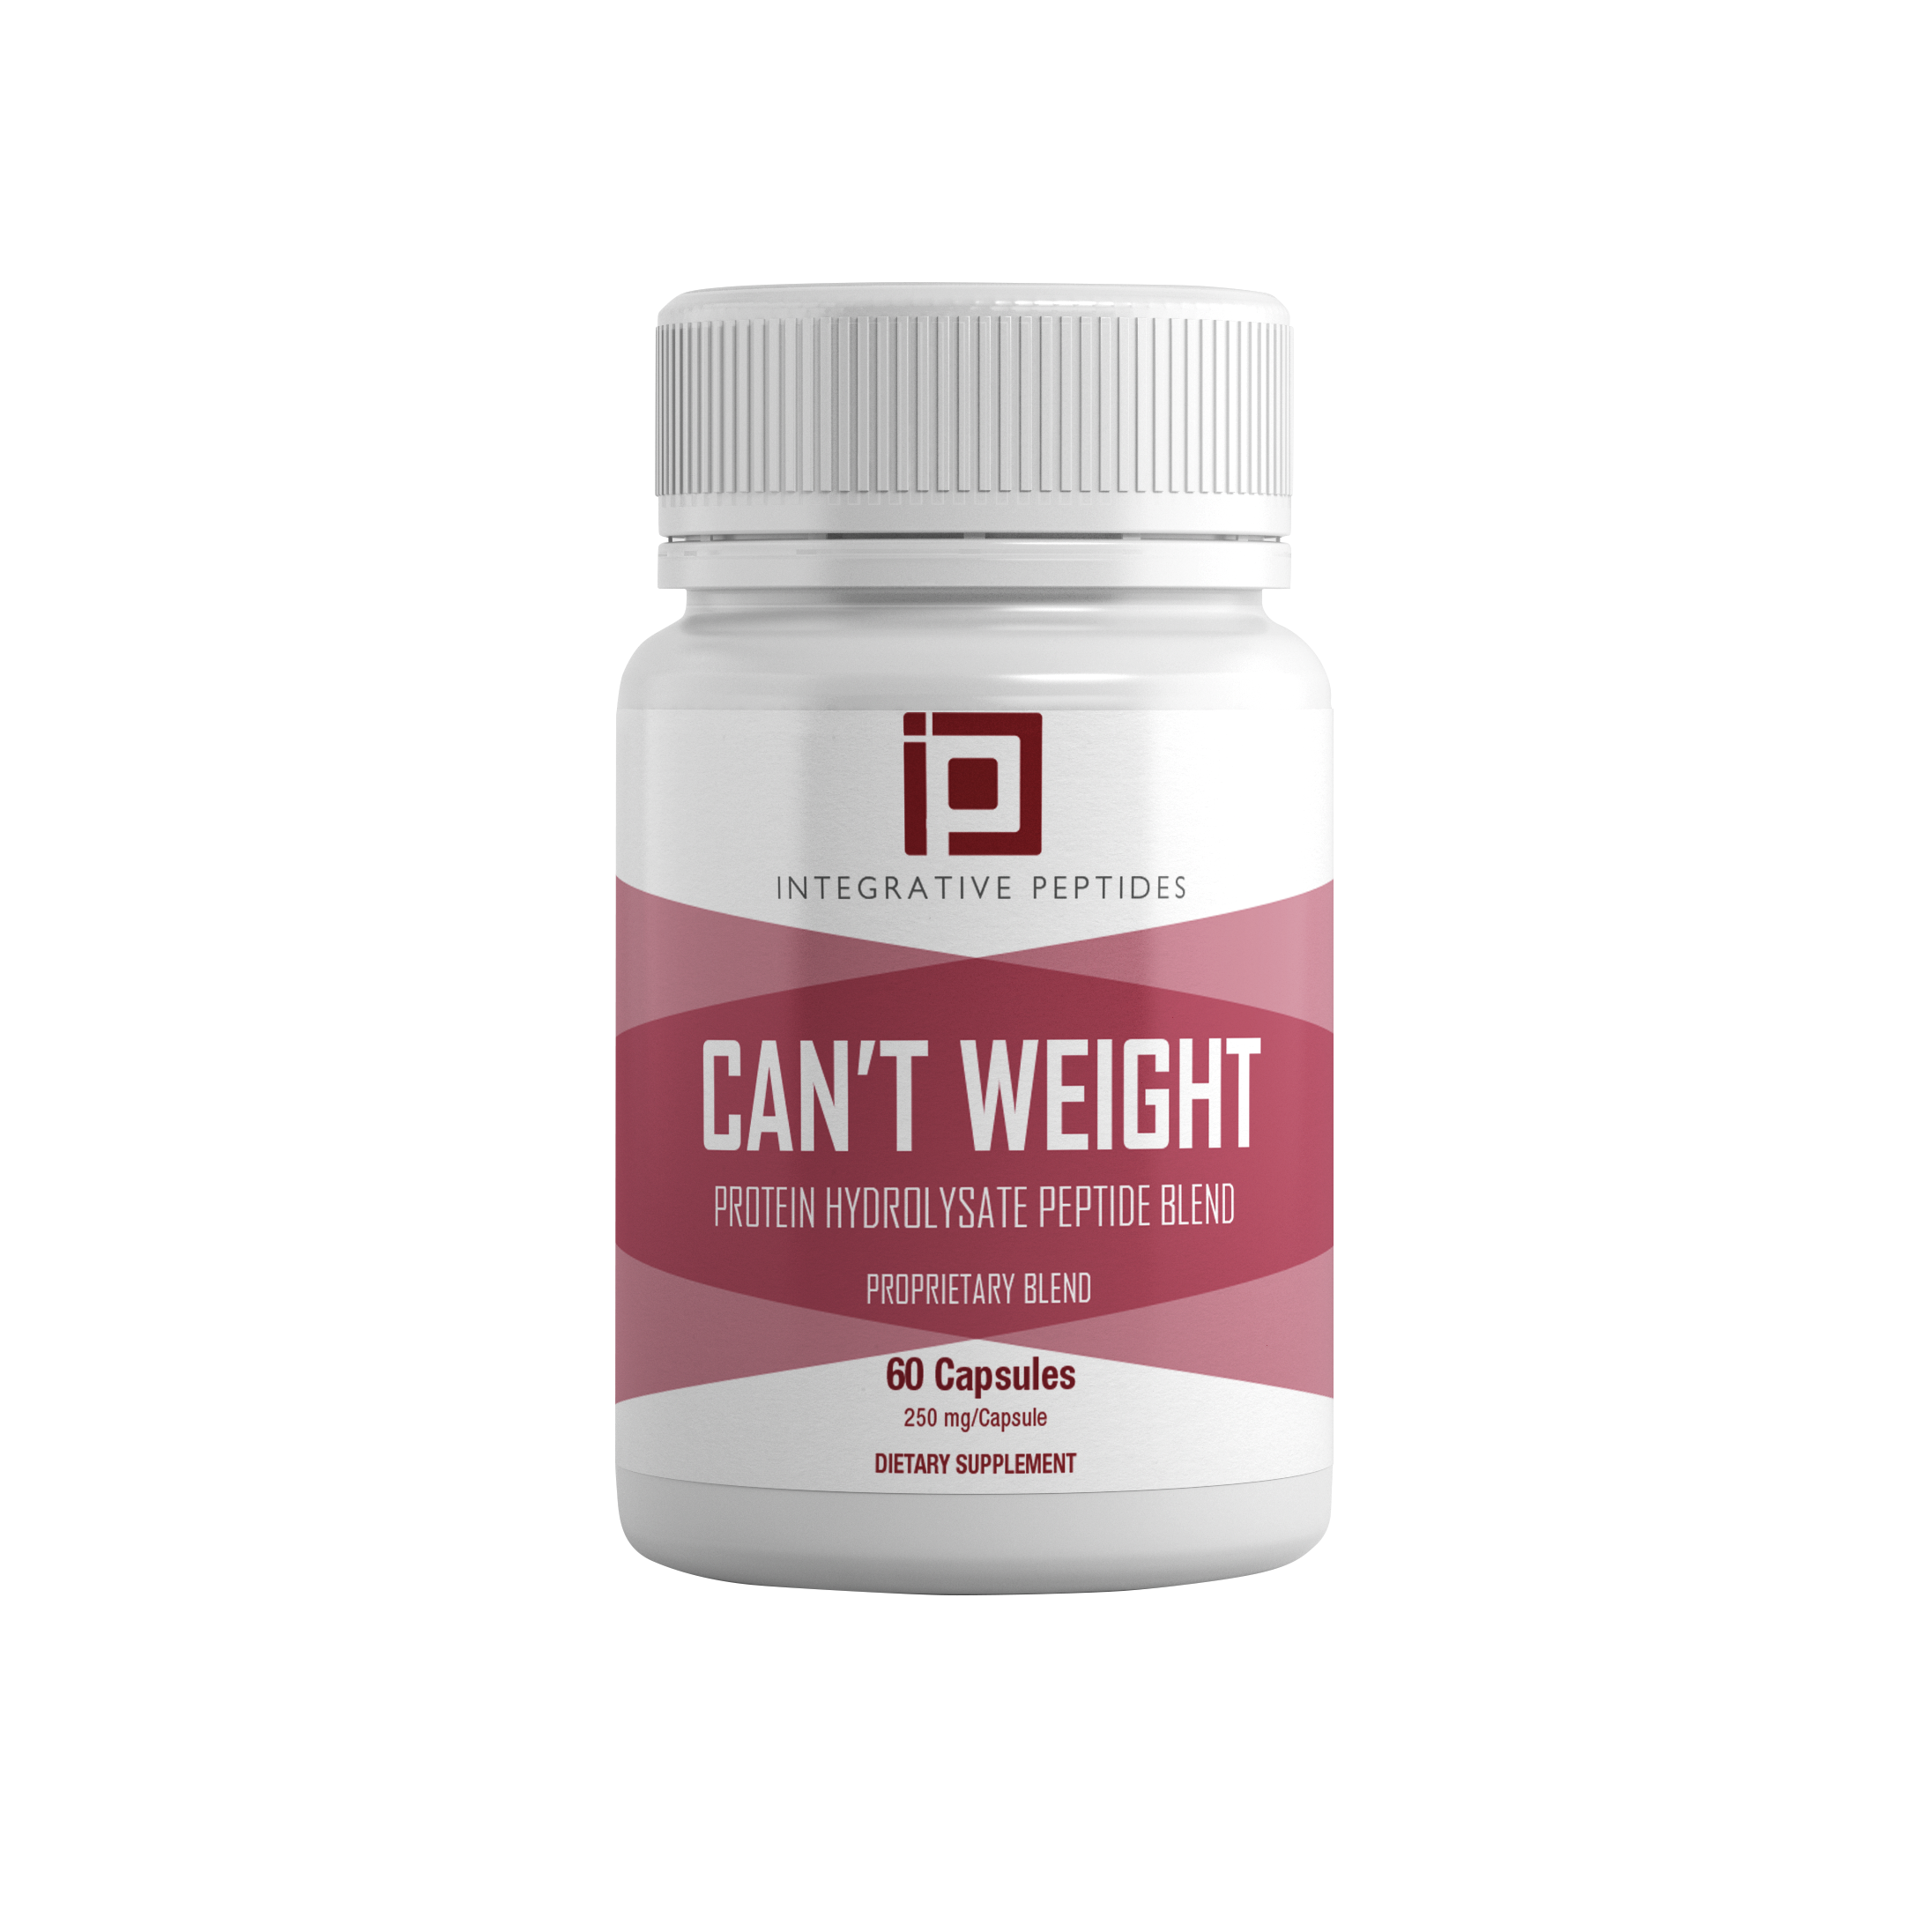 Can't Weight - From Integrative Peptides (60 CAPSULES)